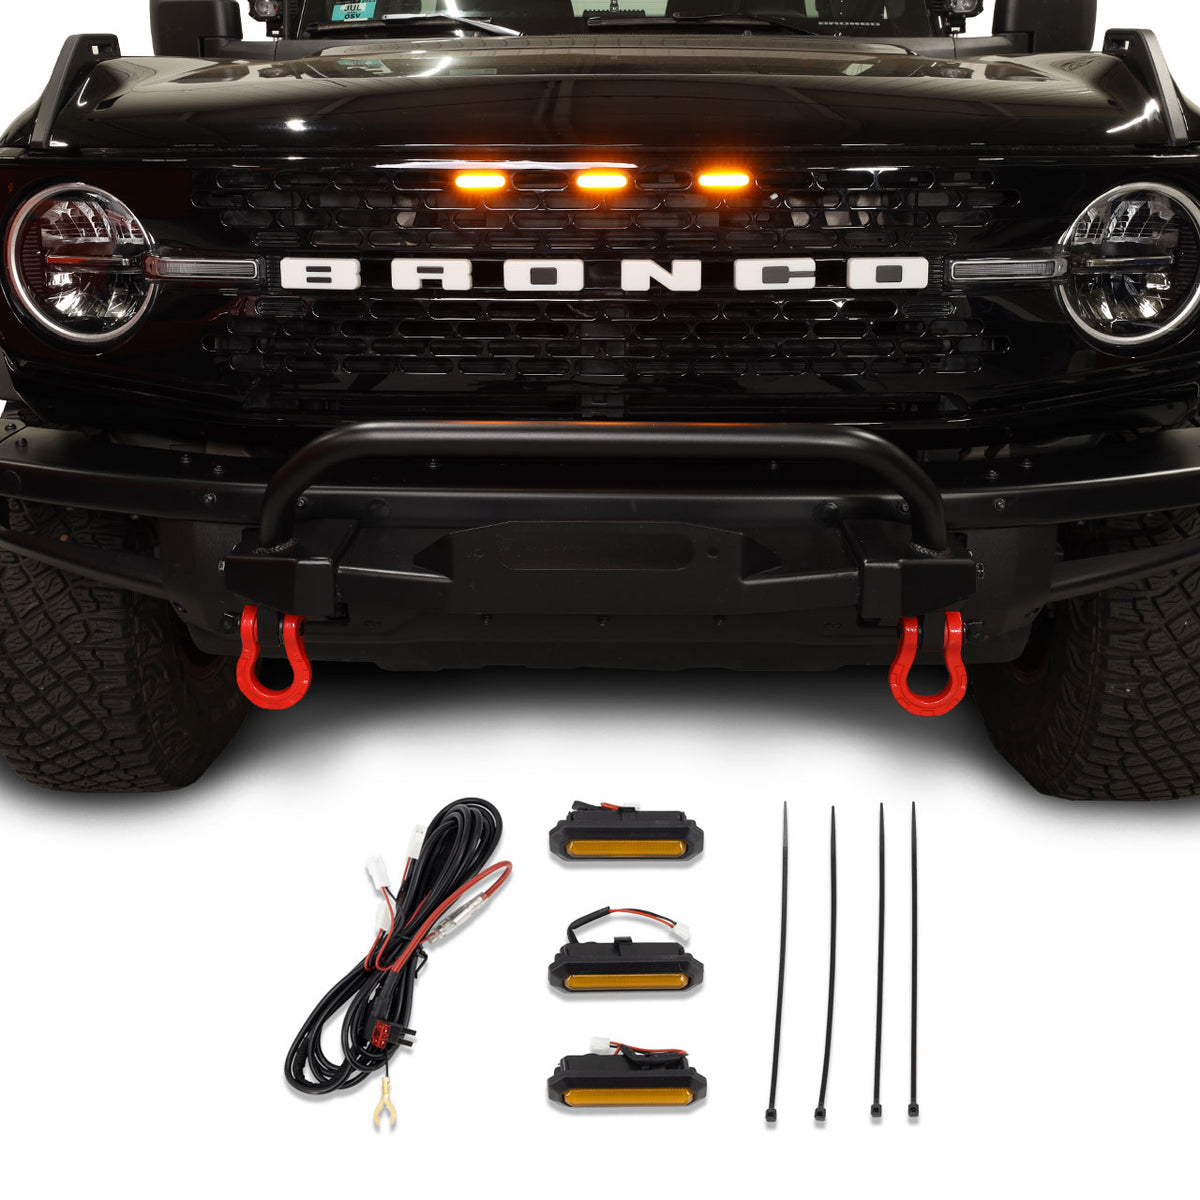 IAG I-Line 3pc Amber Grille Light Kit for High End Grill (Badlands, Wildtrak, First Edition) for 2021+ Ford Bronco